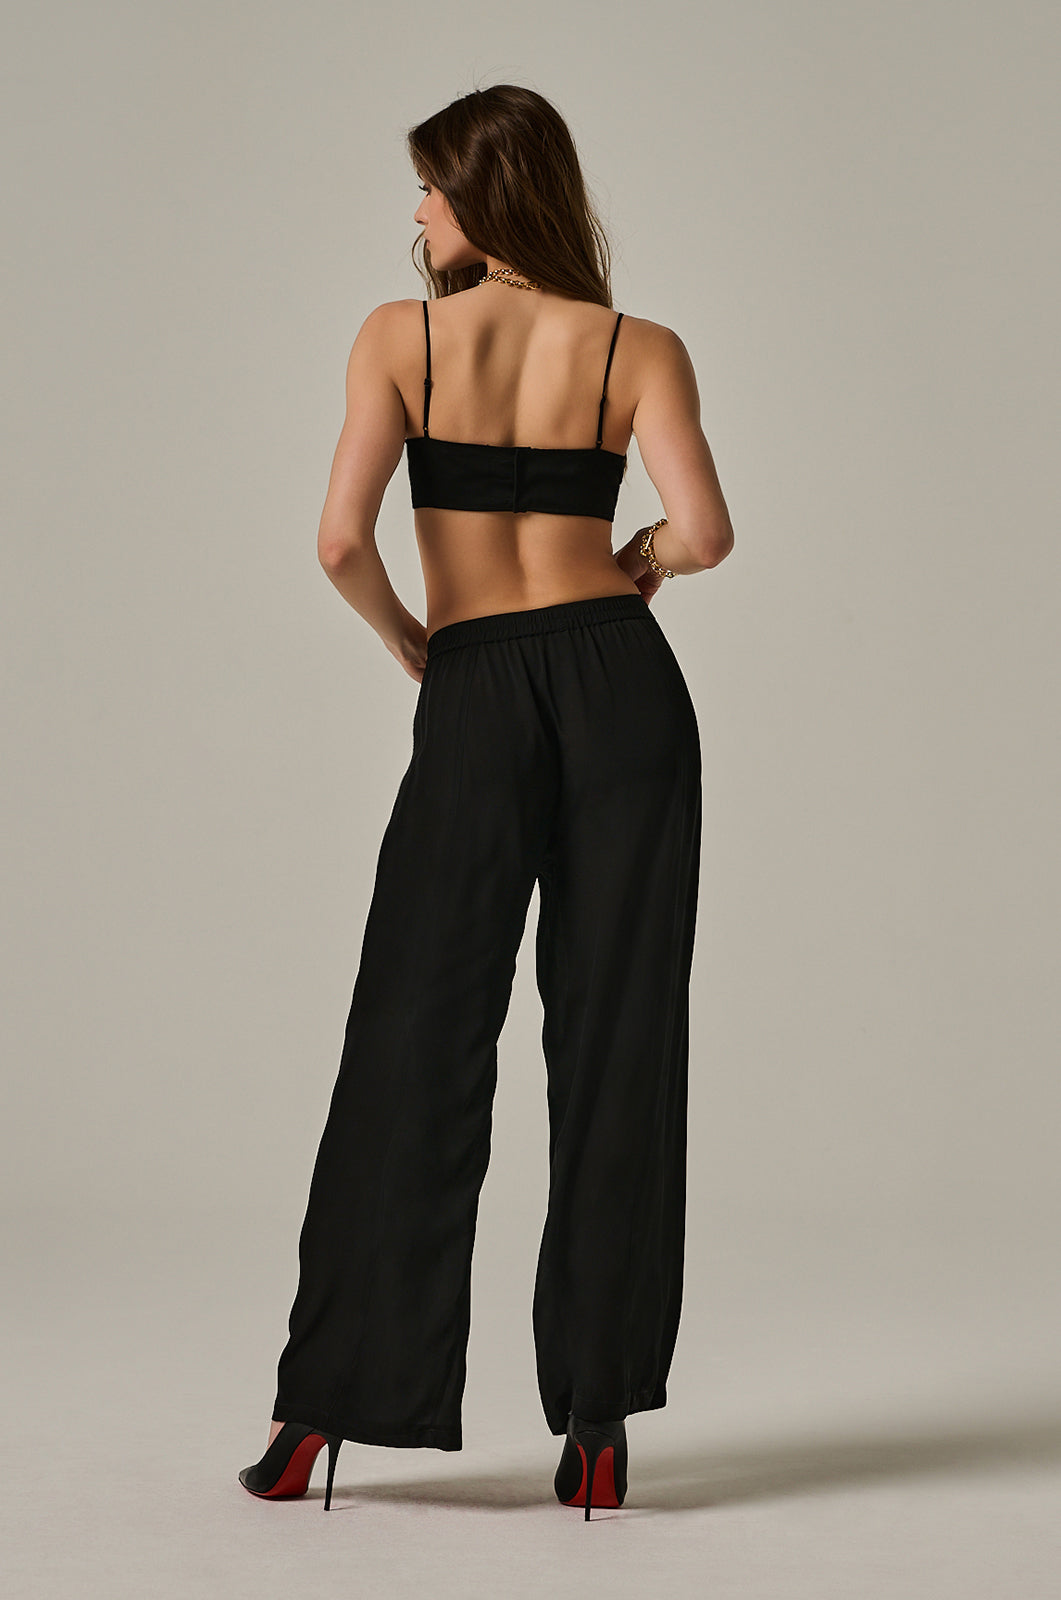 Long black Georgette silk boxer pant with black button closure in front. Elastic waistband and wide legged